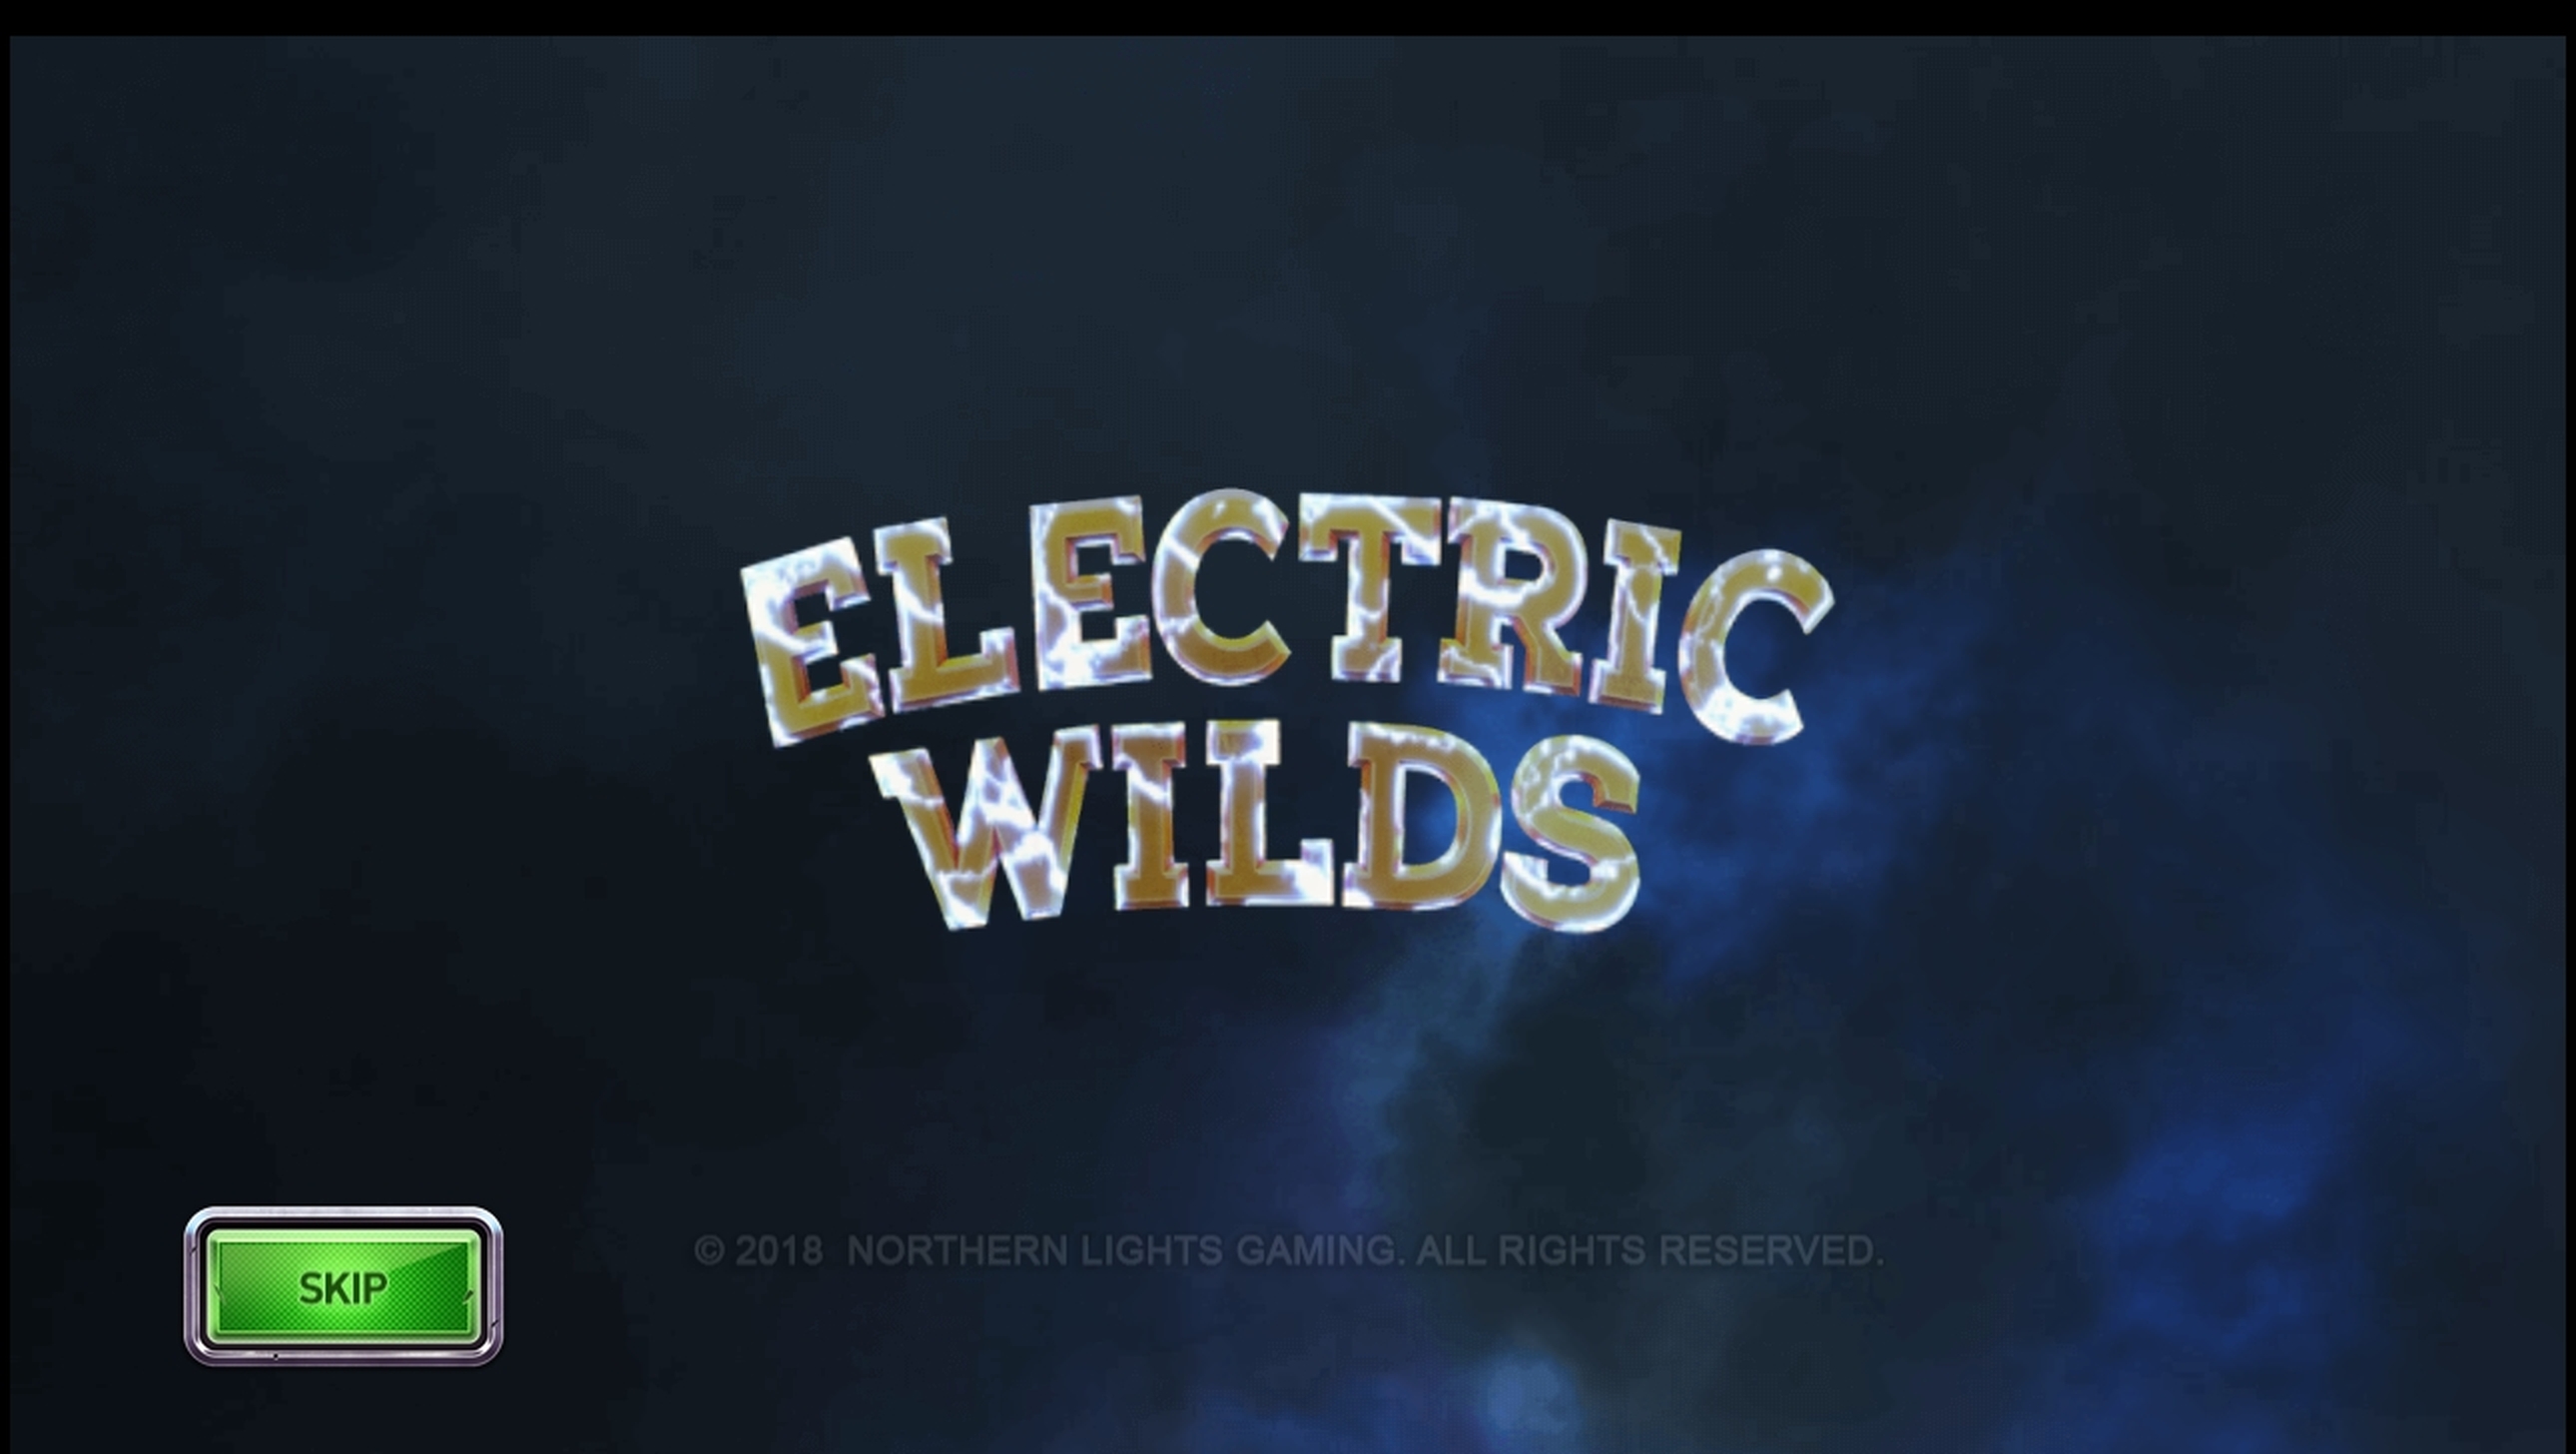 Play Electric Wilds Free Casino Slot Game by Northern Lights Gaming